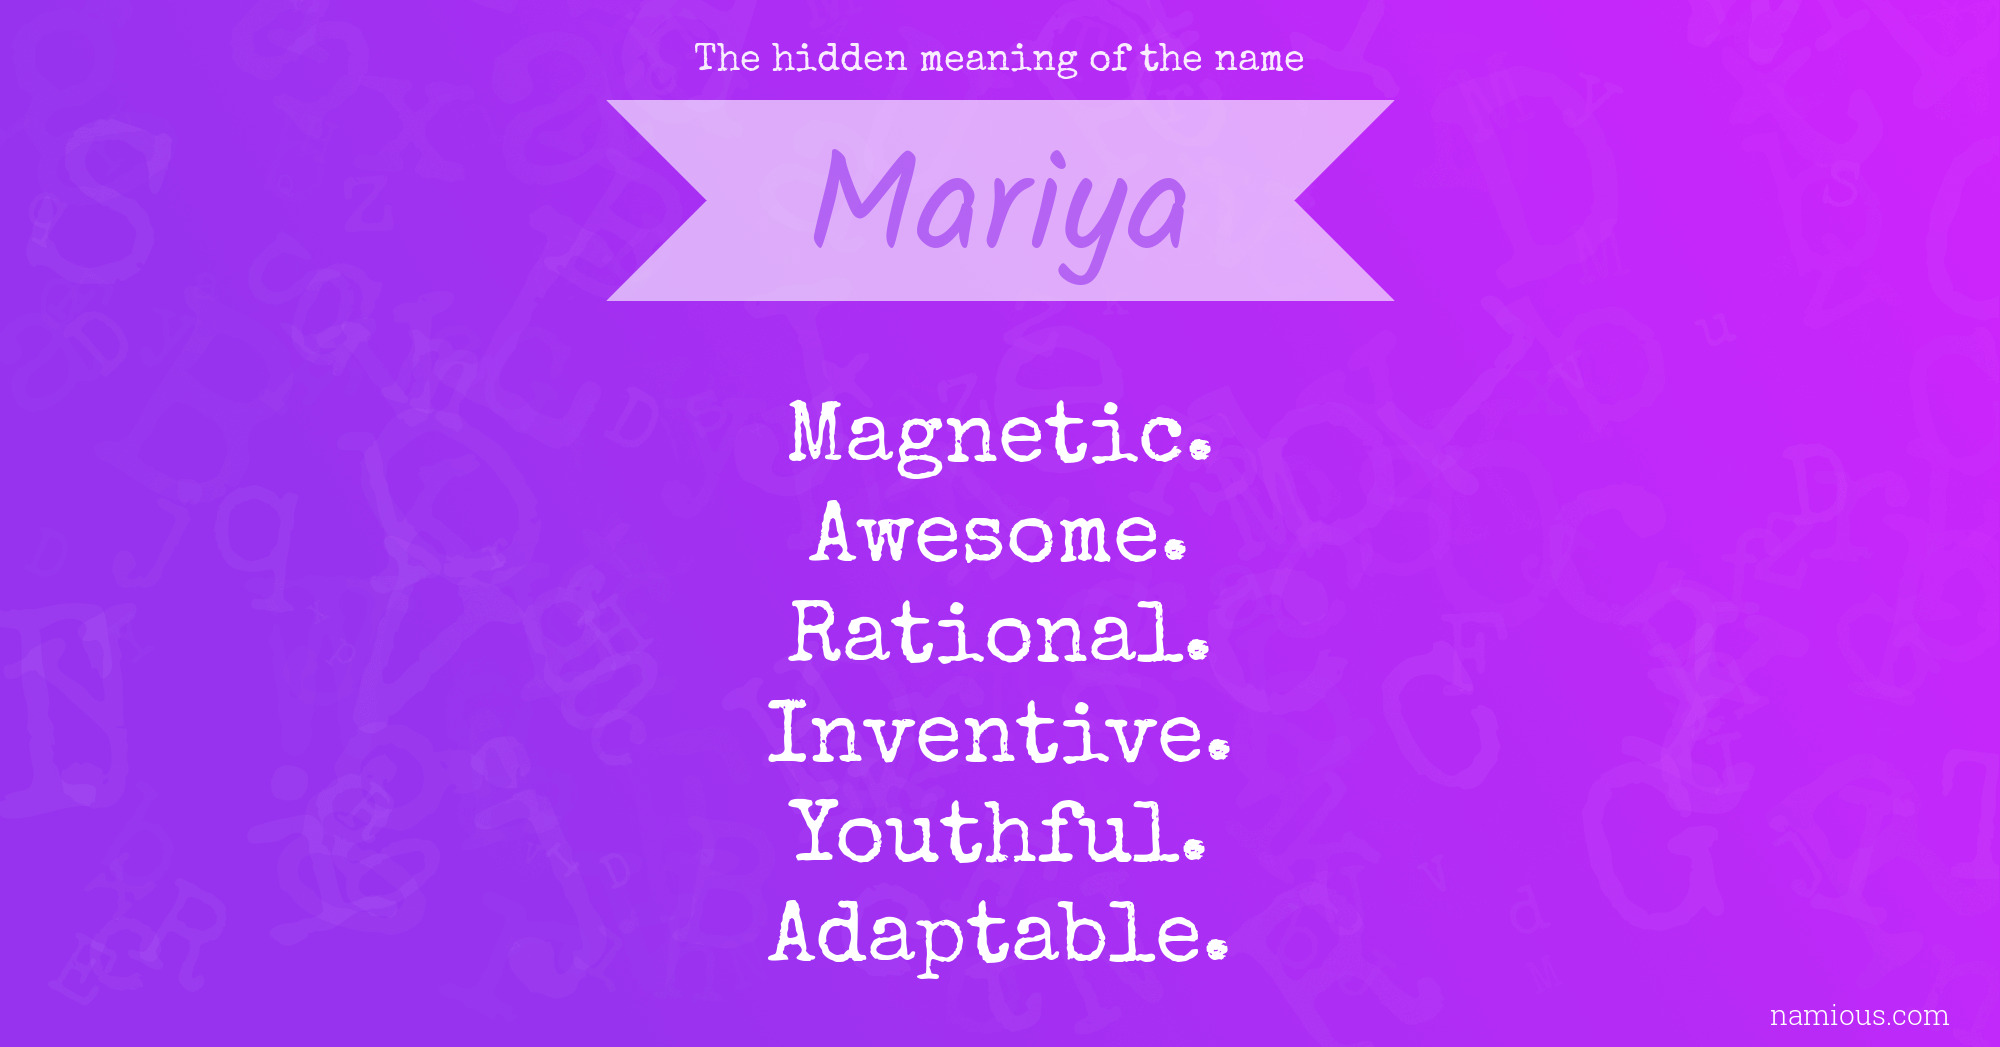 The hidden meaning of the name Mariya